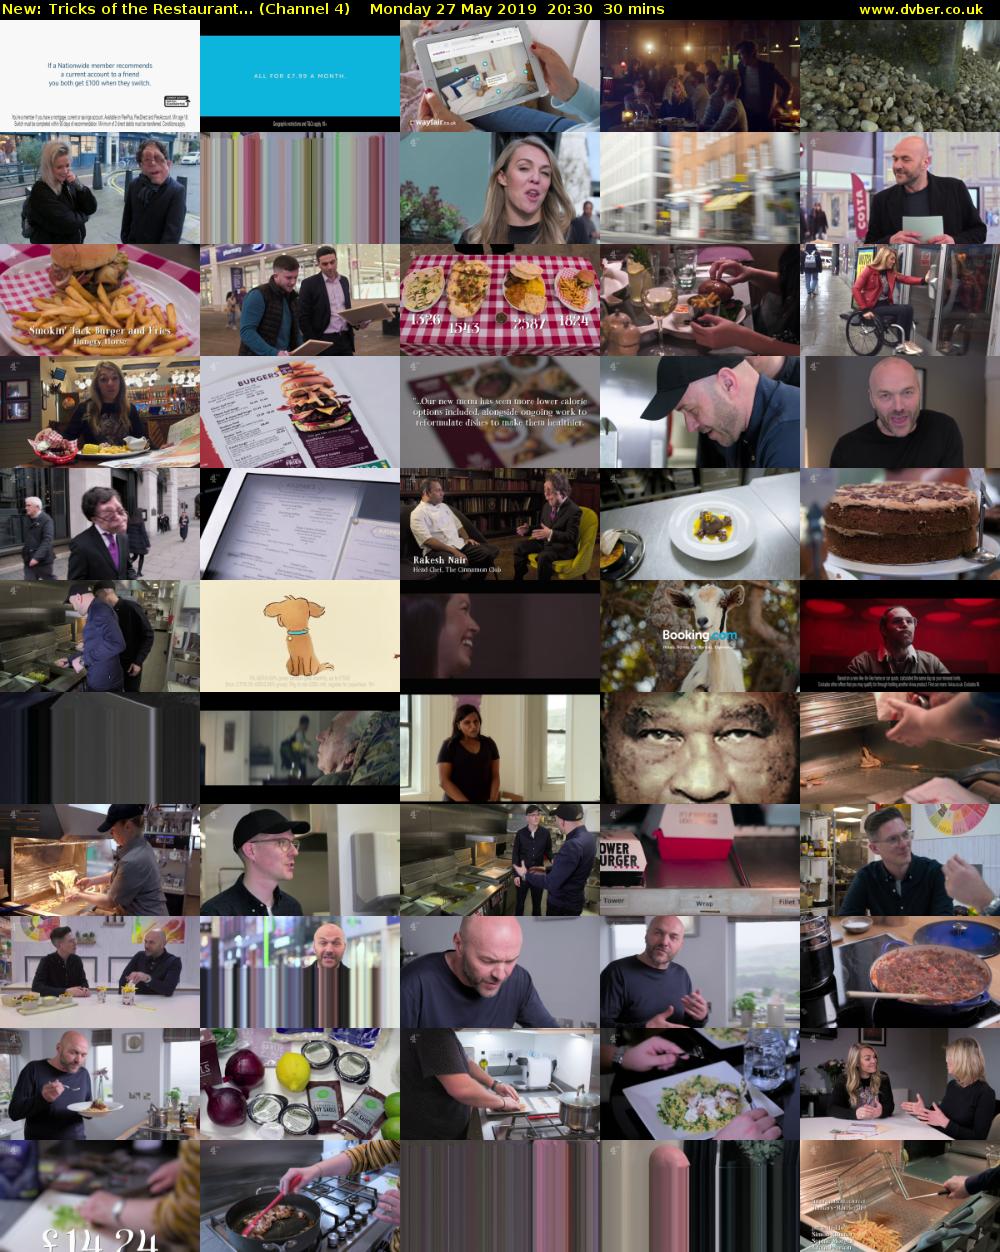 Tricks of the Restaurant... (Channel 4) Monday 27 May 2019 20:30 - 21:00